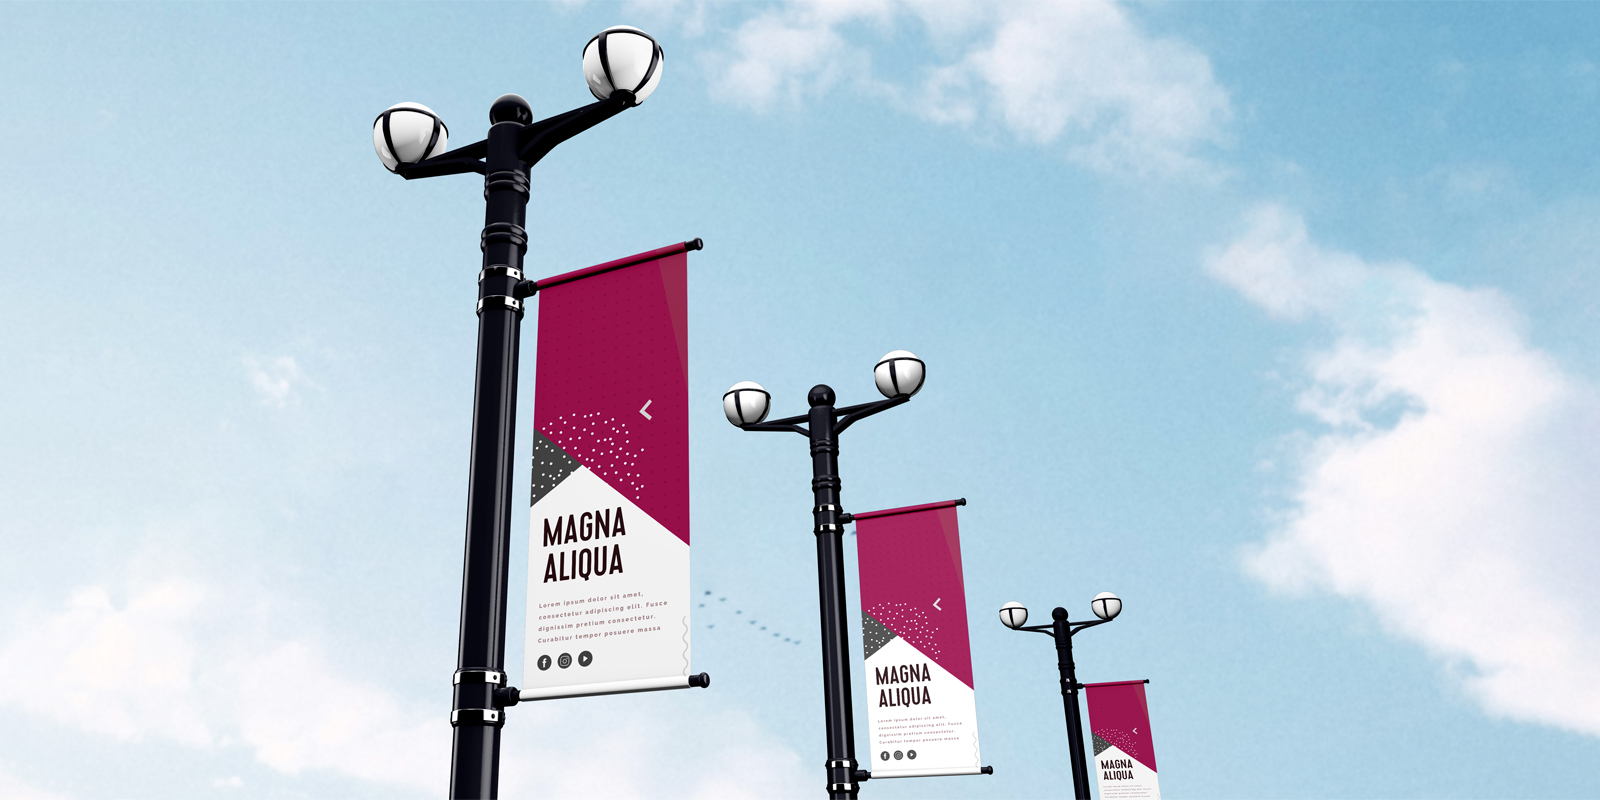 Pole banners in Melbourne - Print with Pagerr